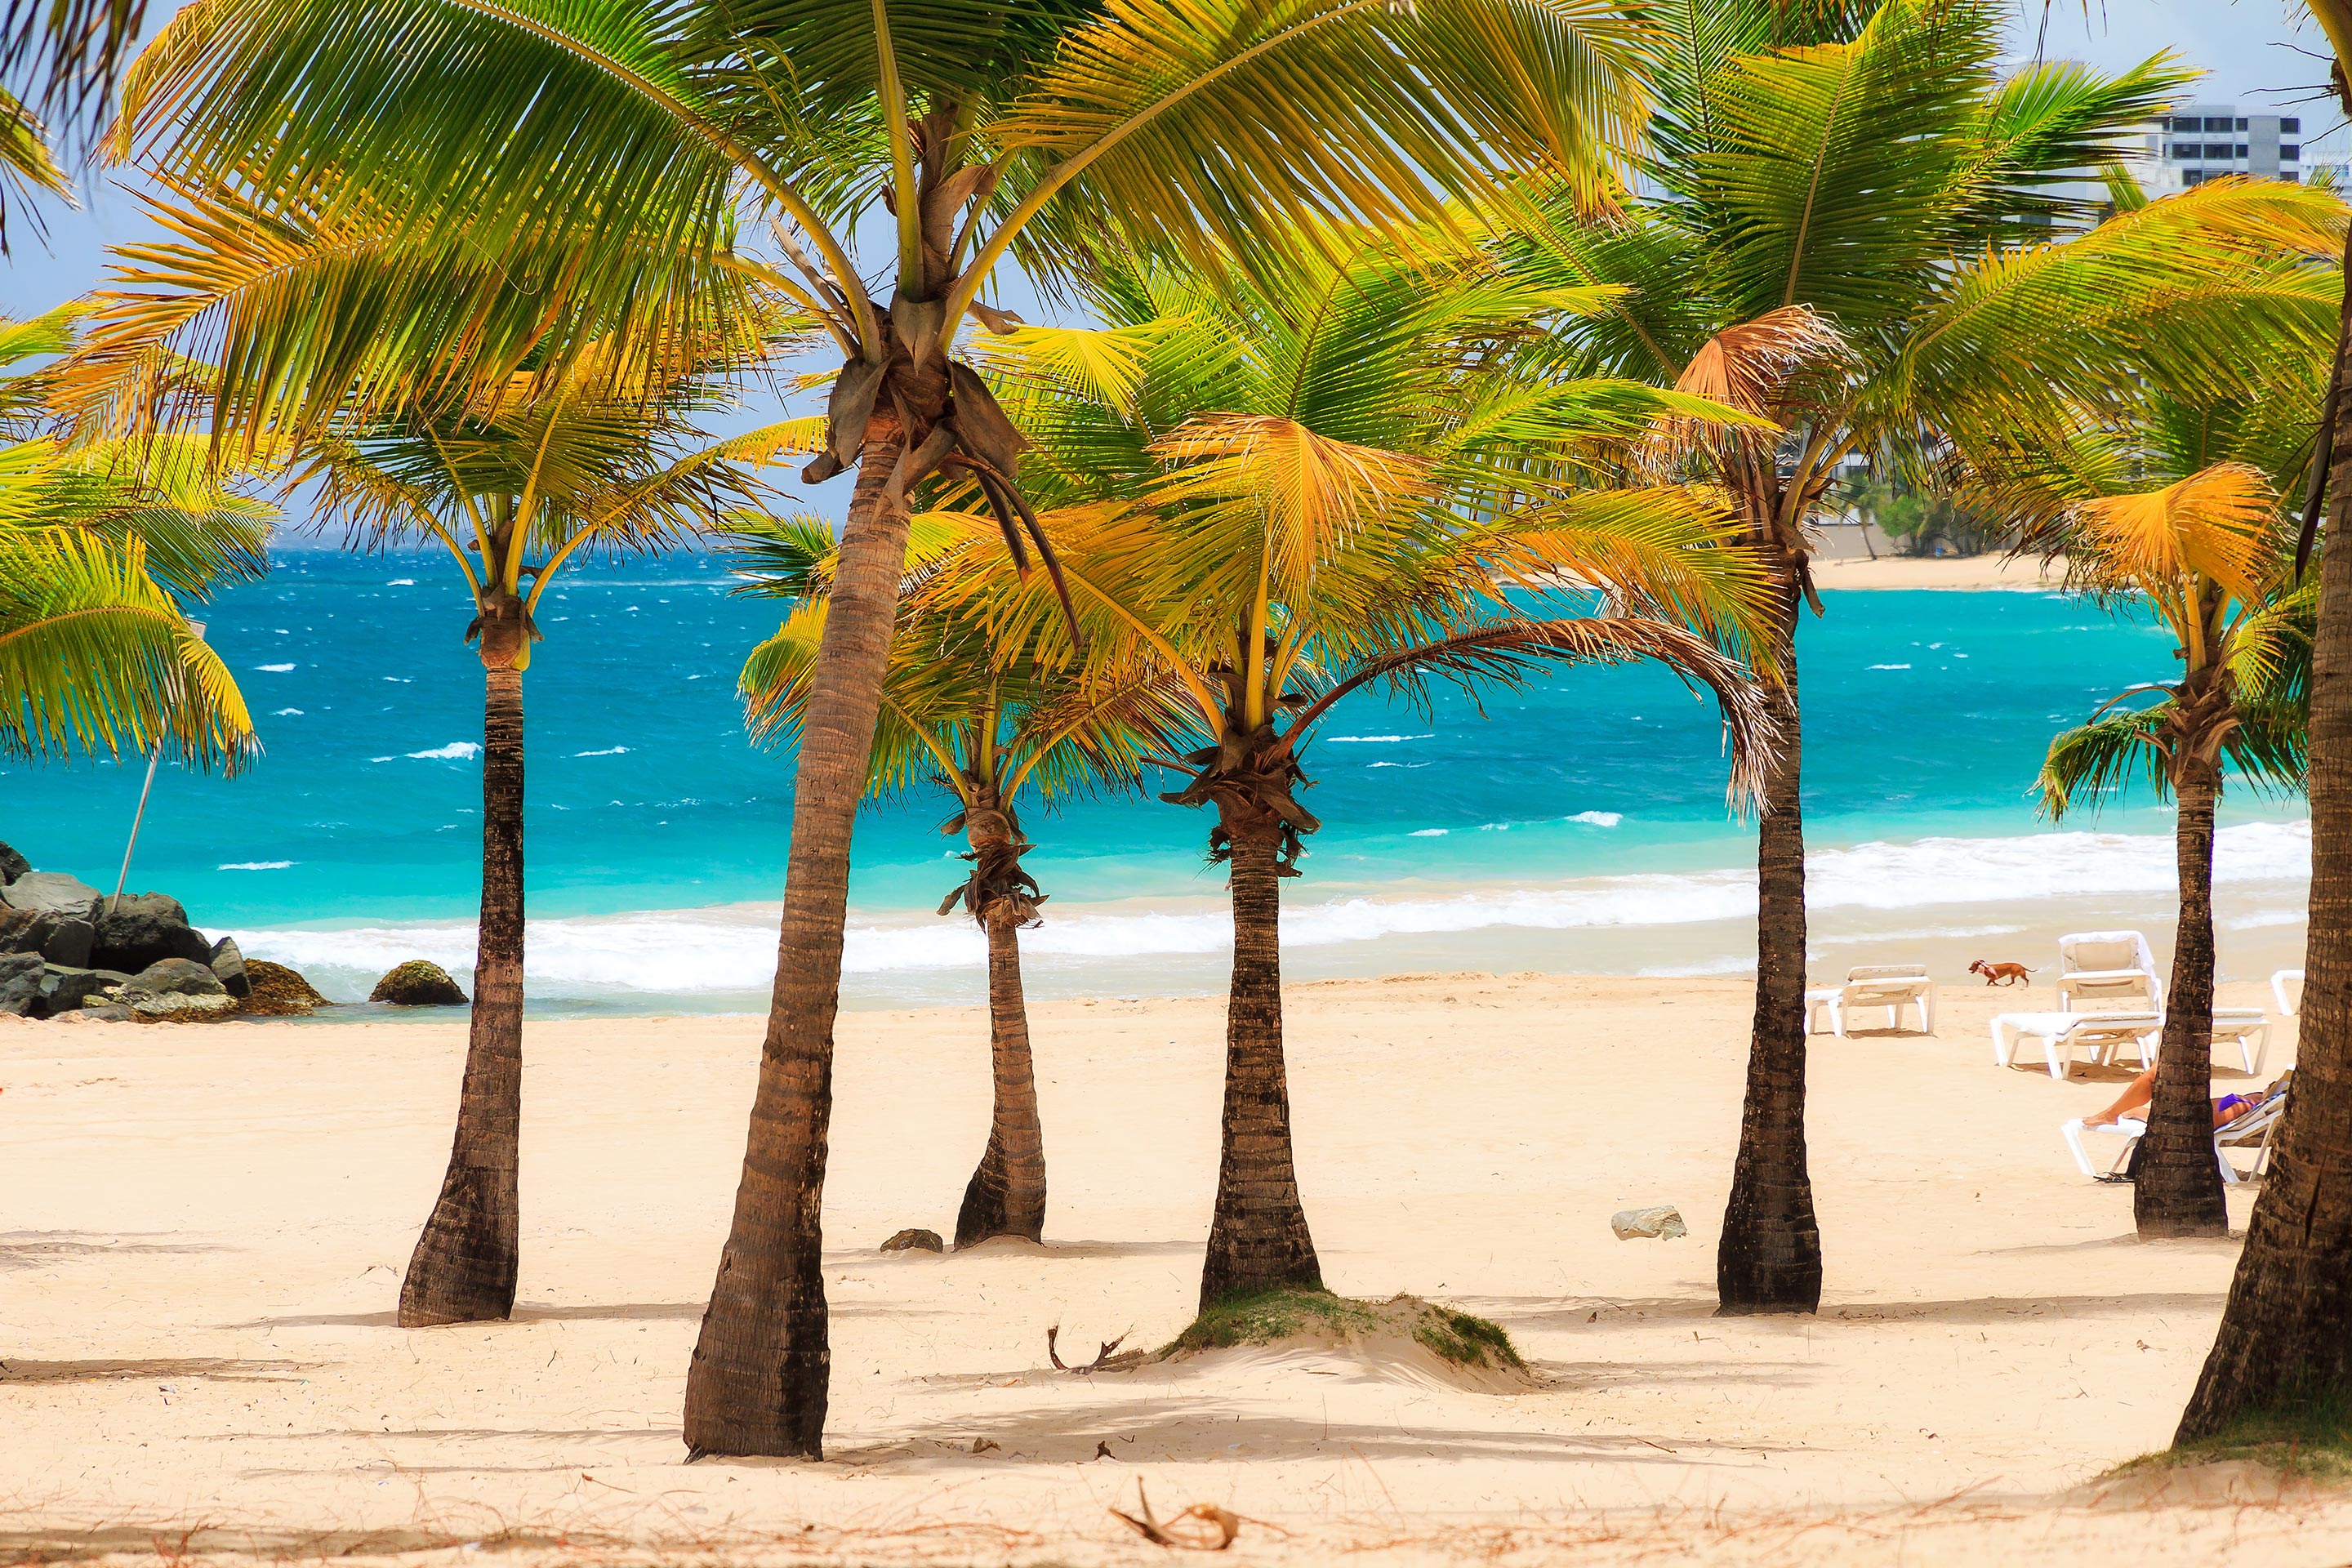 Tropical Palms on a Beautiful Beach in the Caribbean